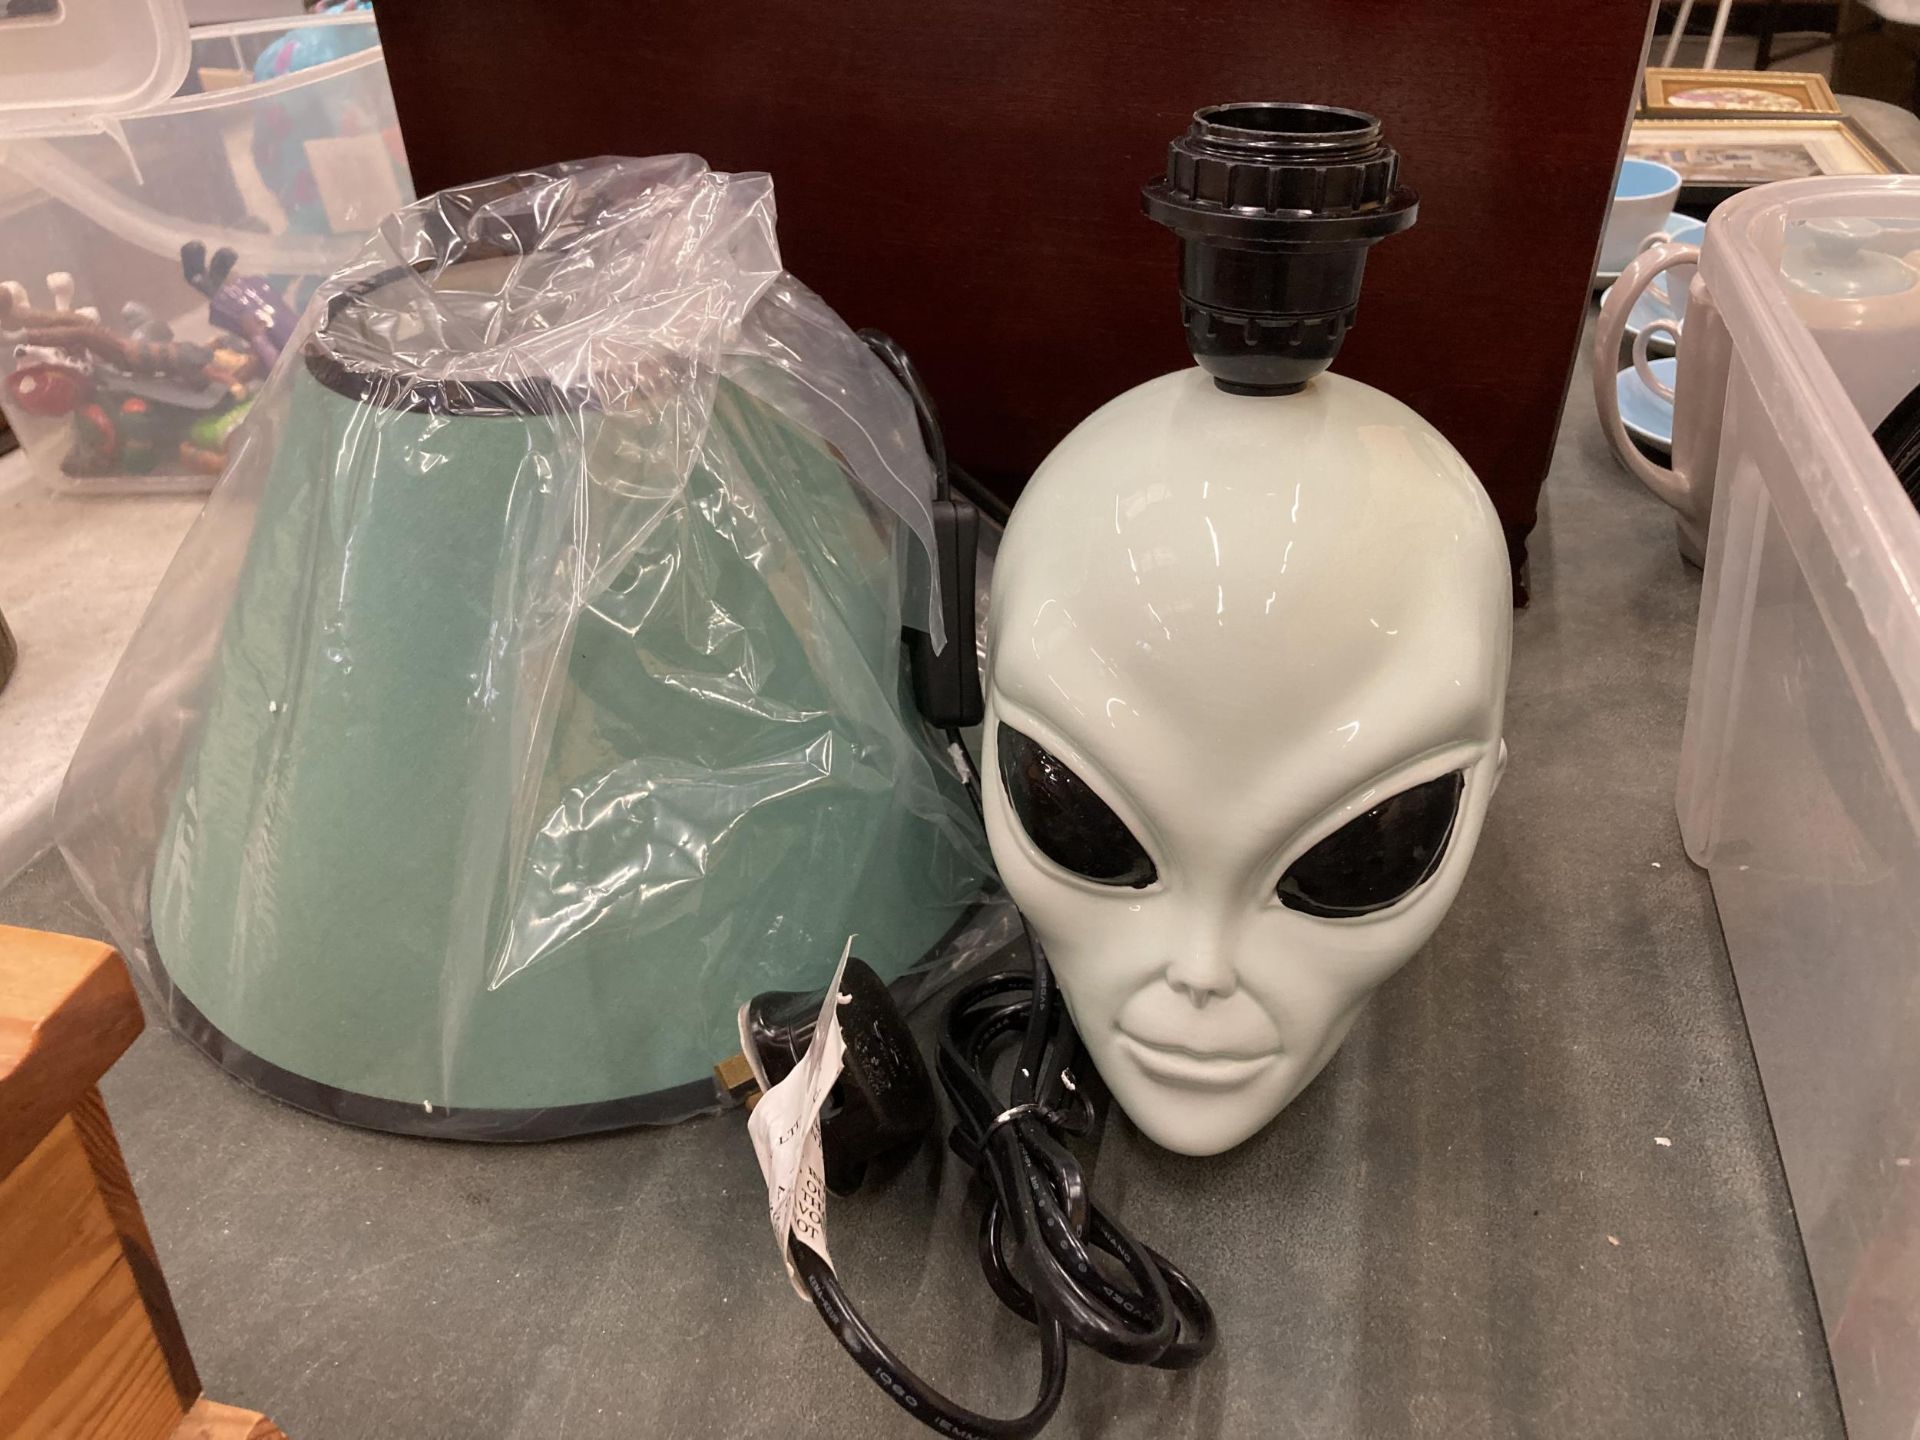 AN 'ALIEN' TABLE LAMP WITH SHADE - AS NEW IN BOX